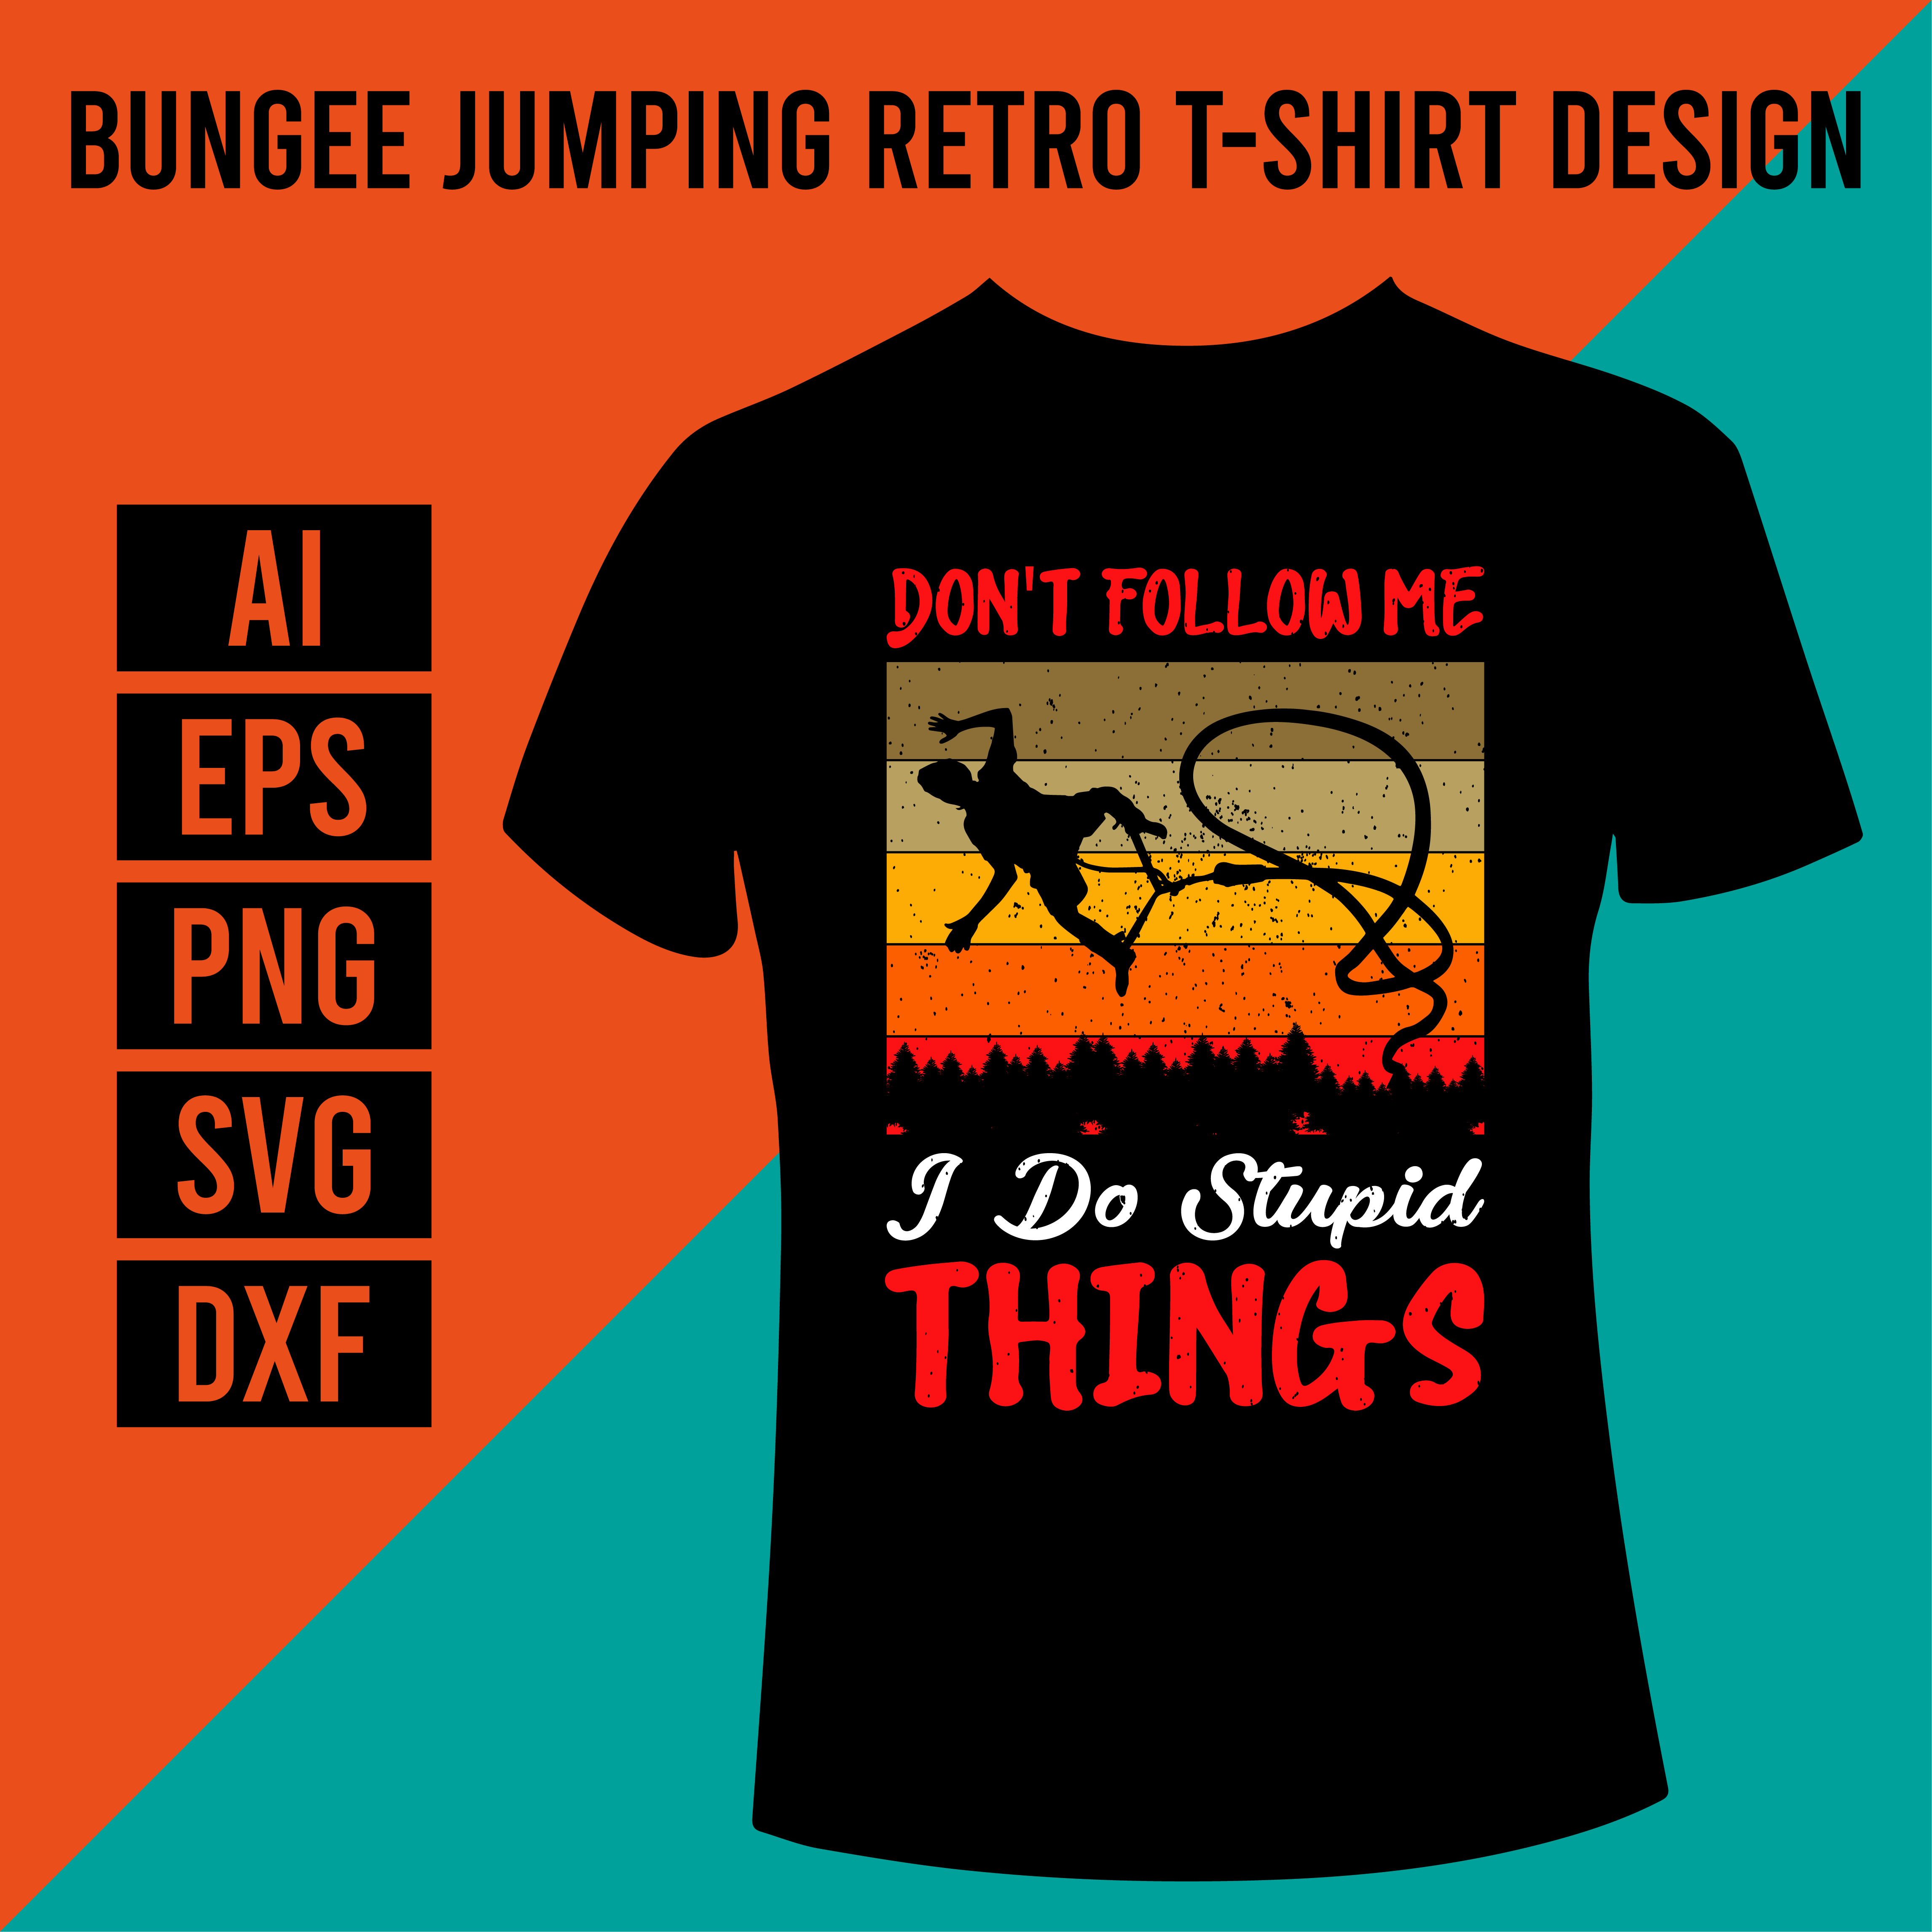 Bungee Jumping Retro T-Shirt Design cover image.